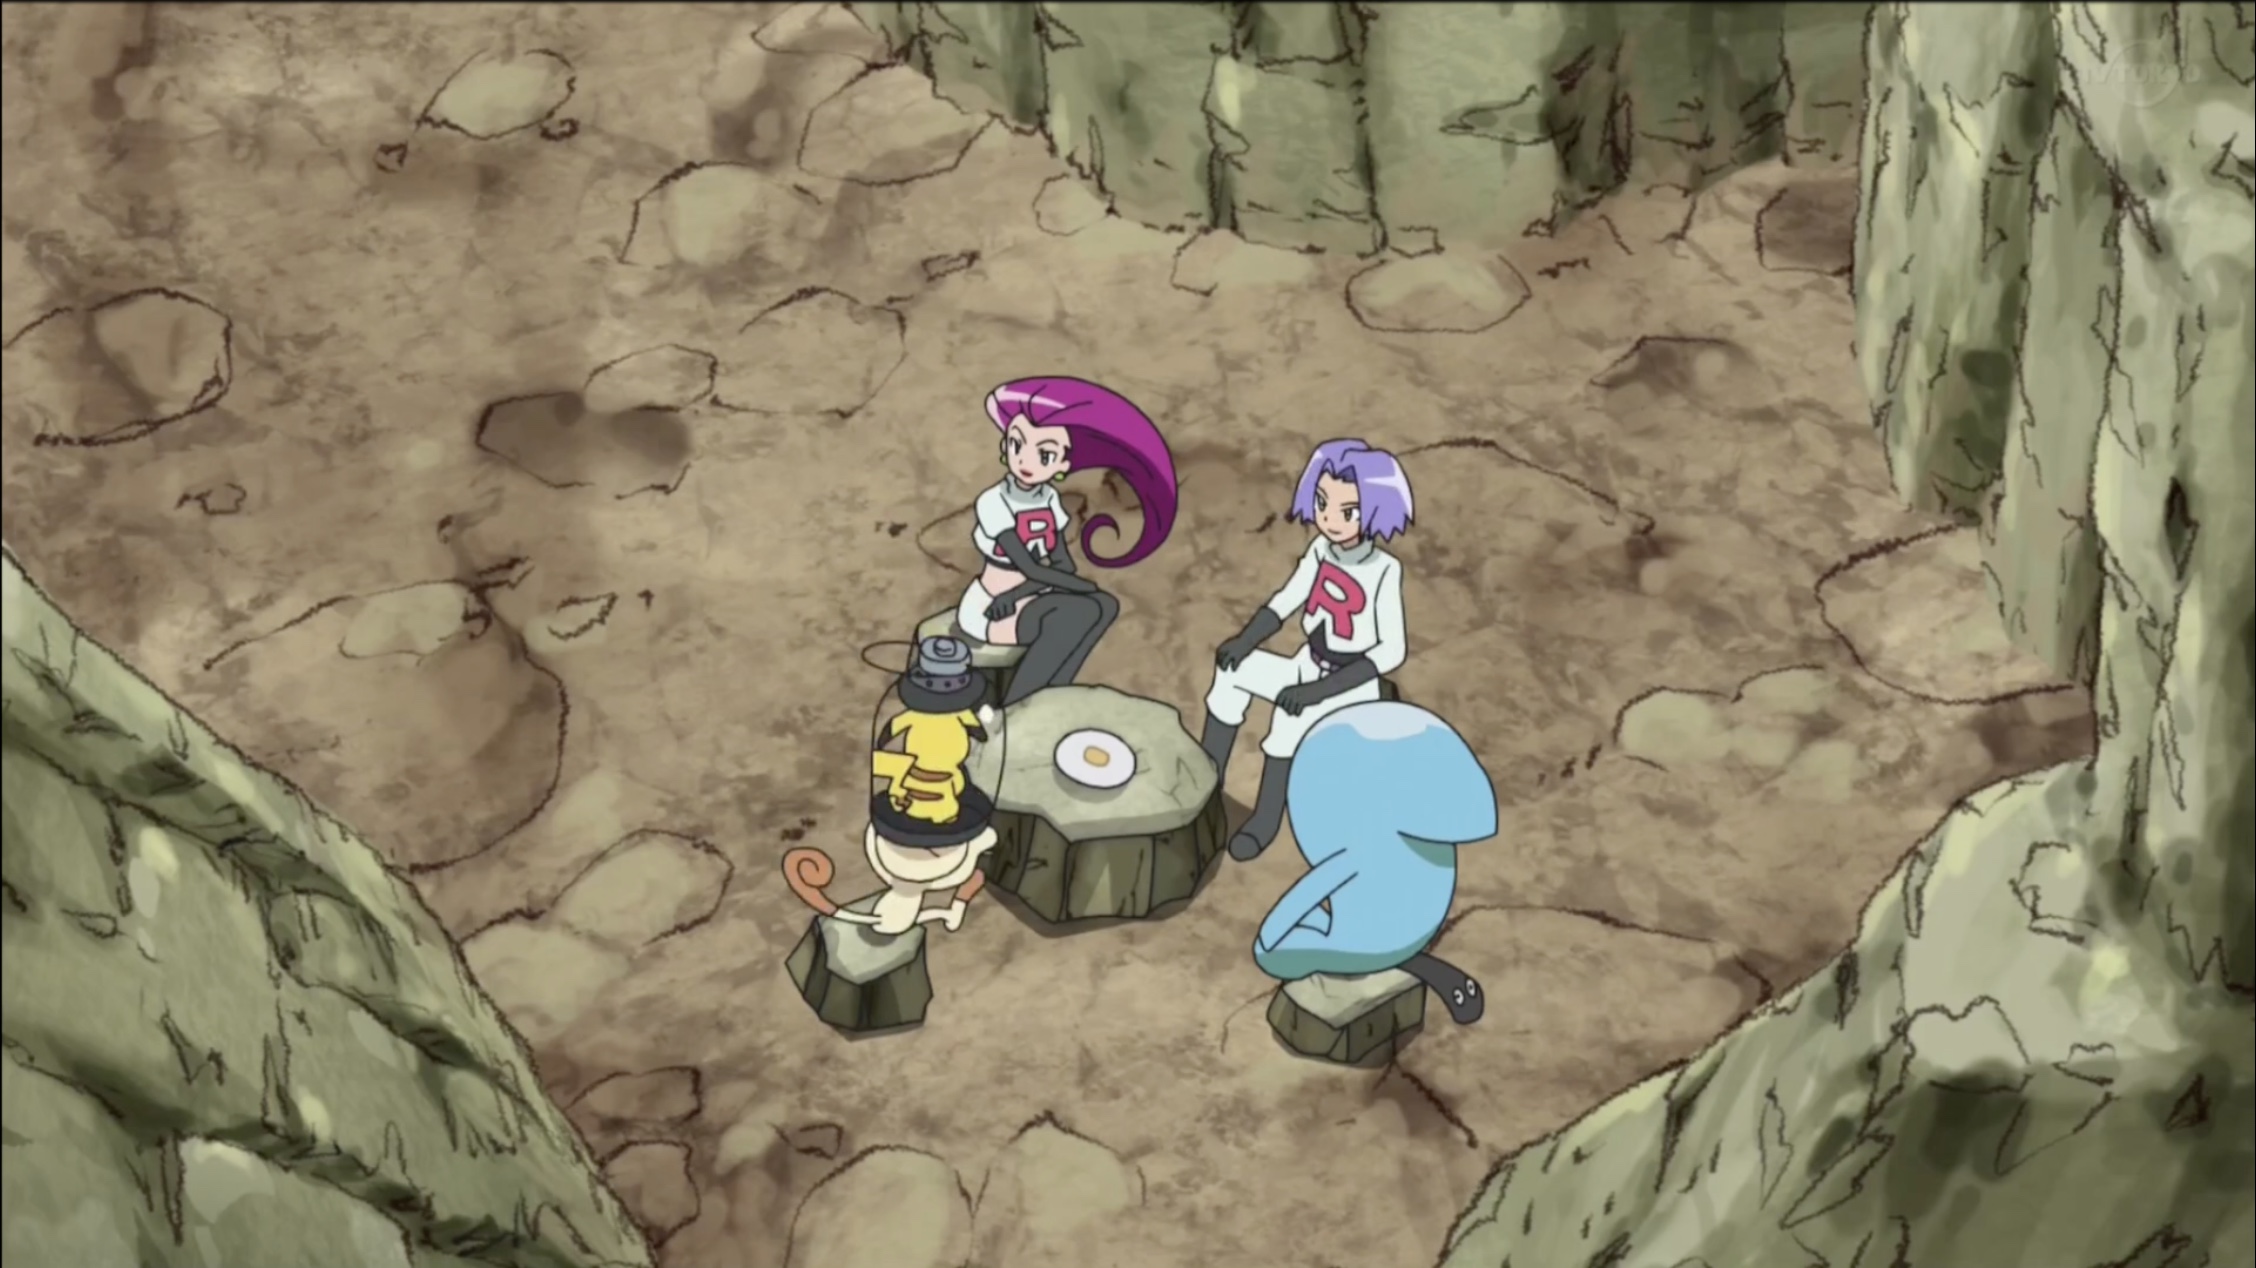 Dexholder Diaries — The Team Rocket plotline is wrapped up, so all